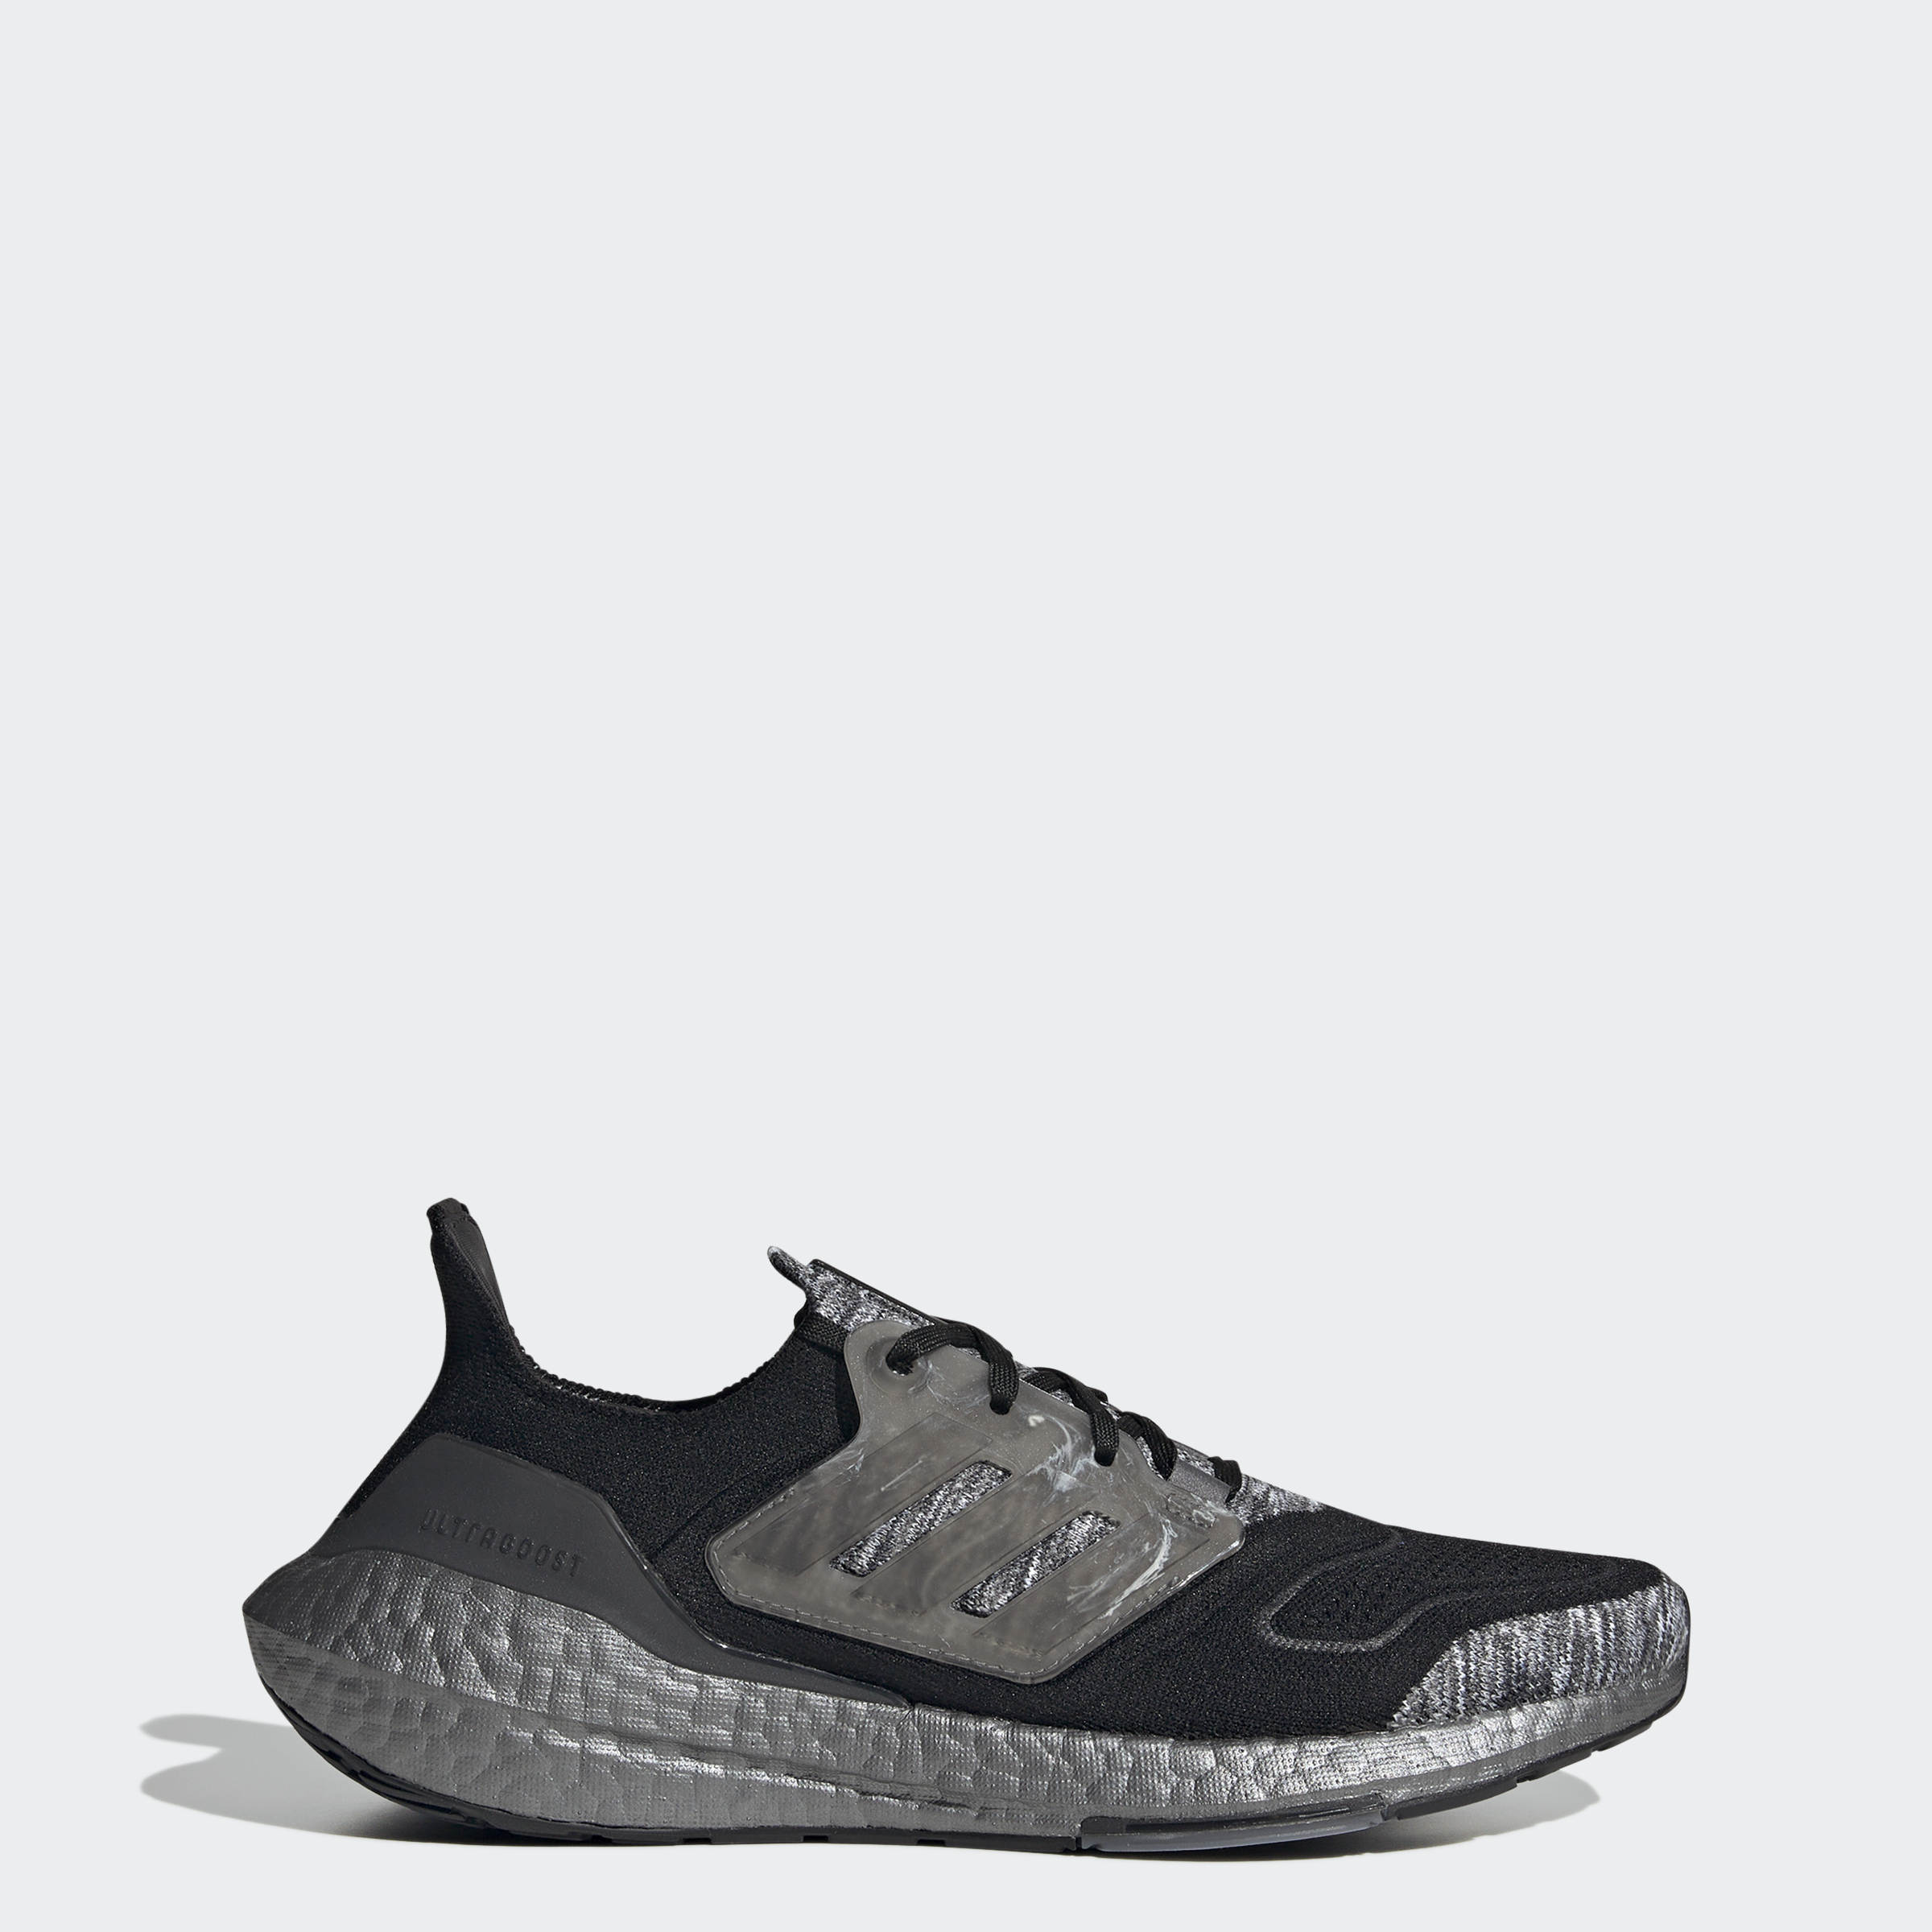 adidas Men's Ultraboost 22 Running Shoe (Core Black/ Grey Four/ Carbon or Collegiate Navy) $54.72 + Free Shipping